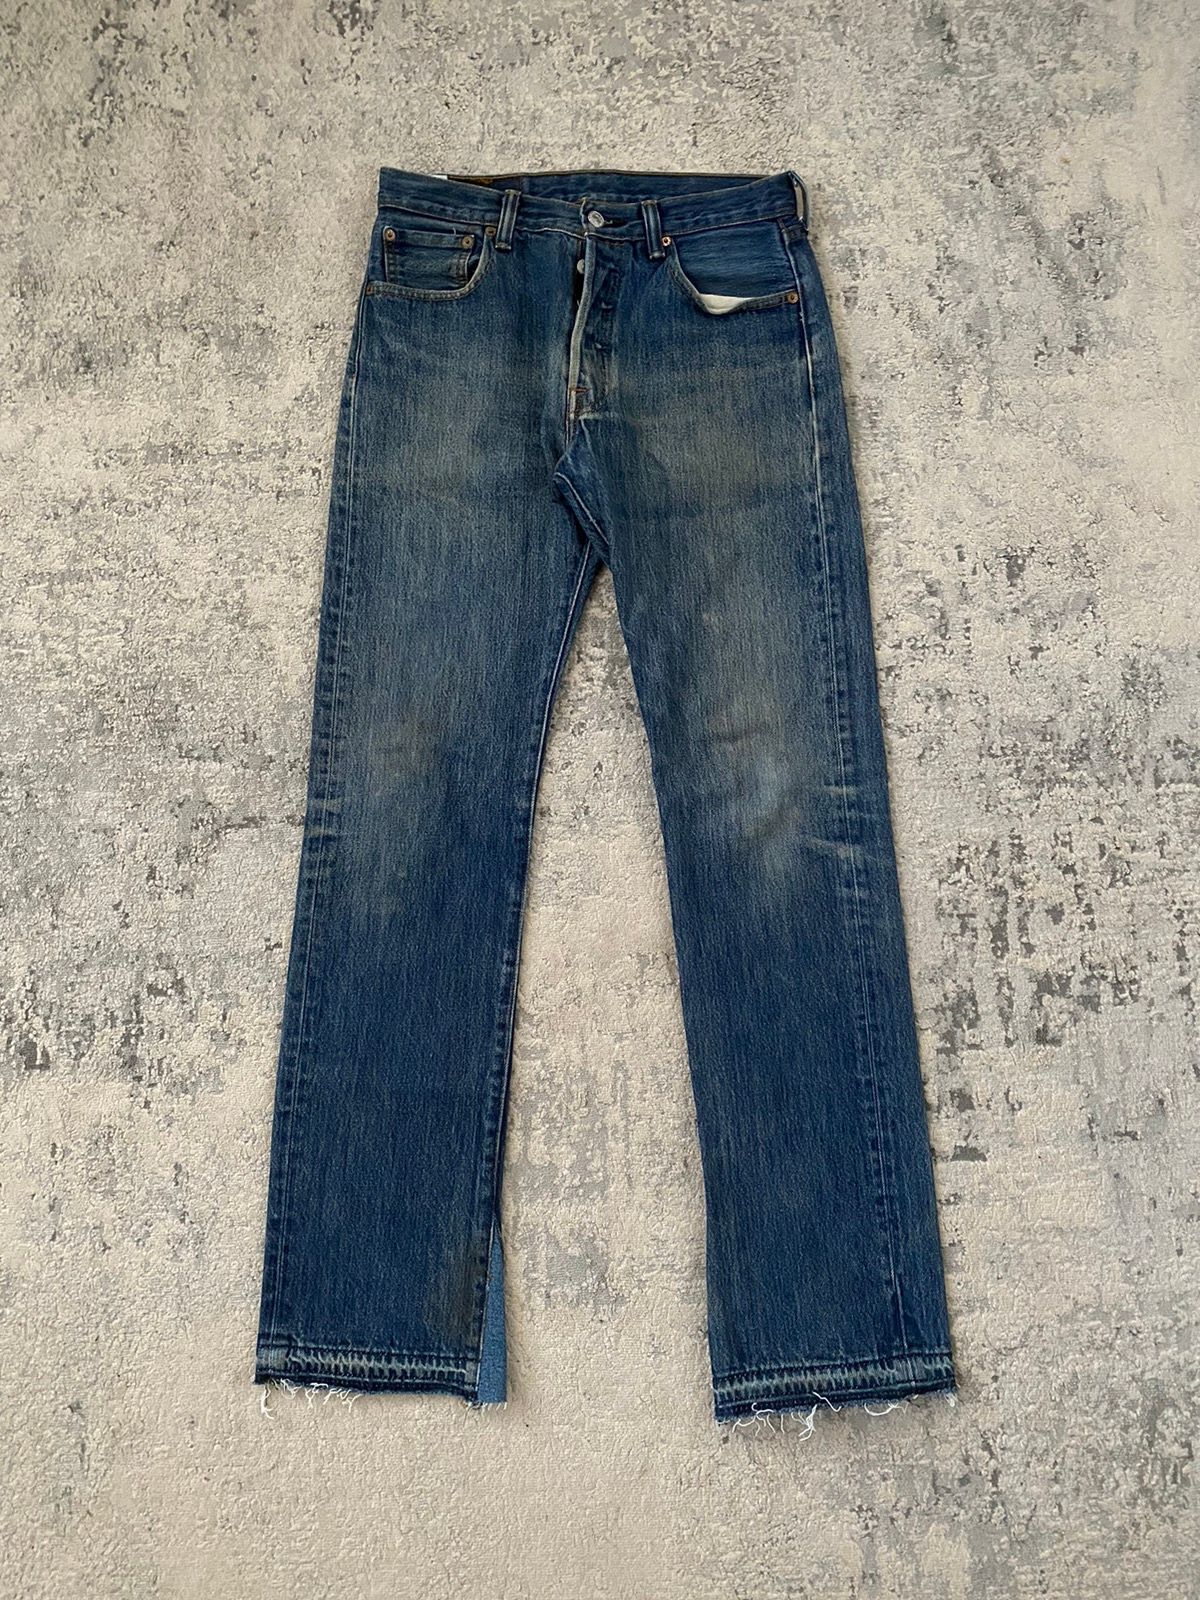 Vintage Levi’s 501 Sun Faded Flared Jeans | Grailed